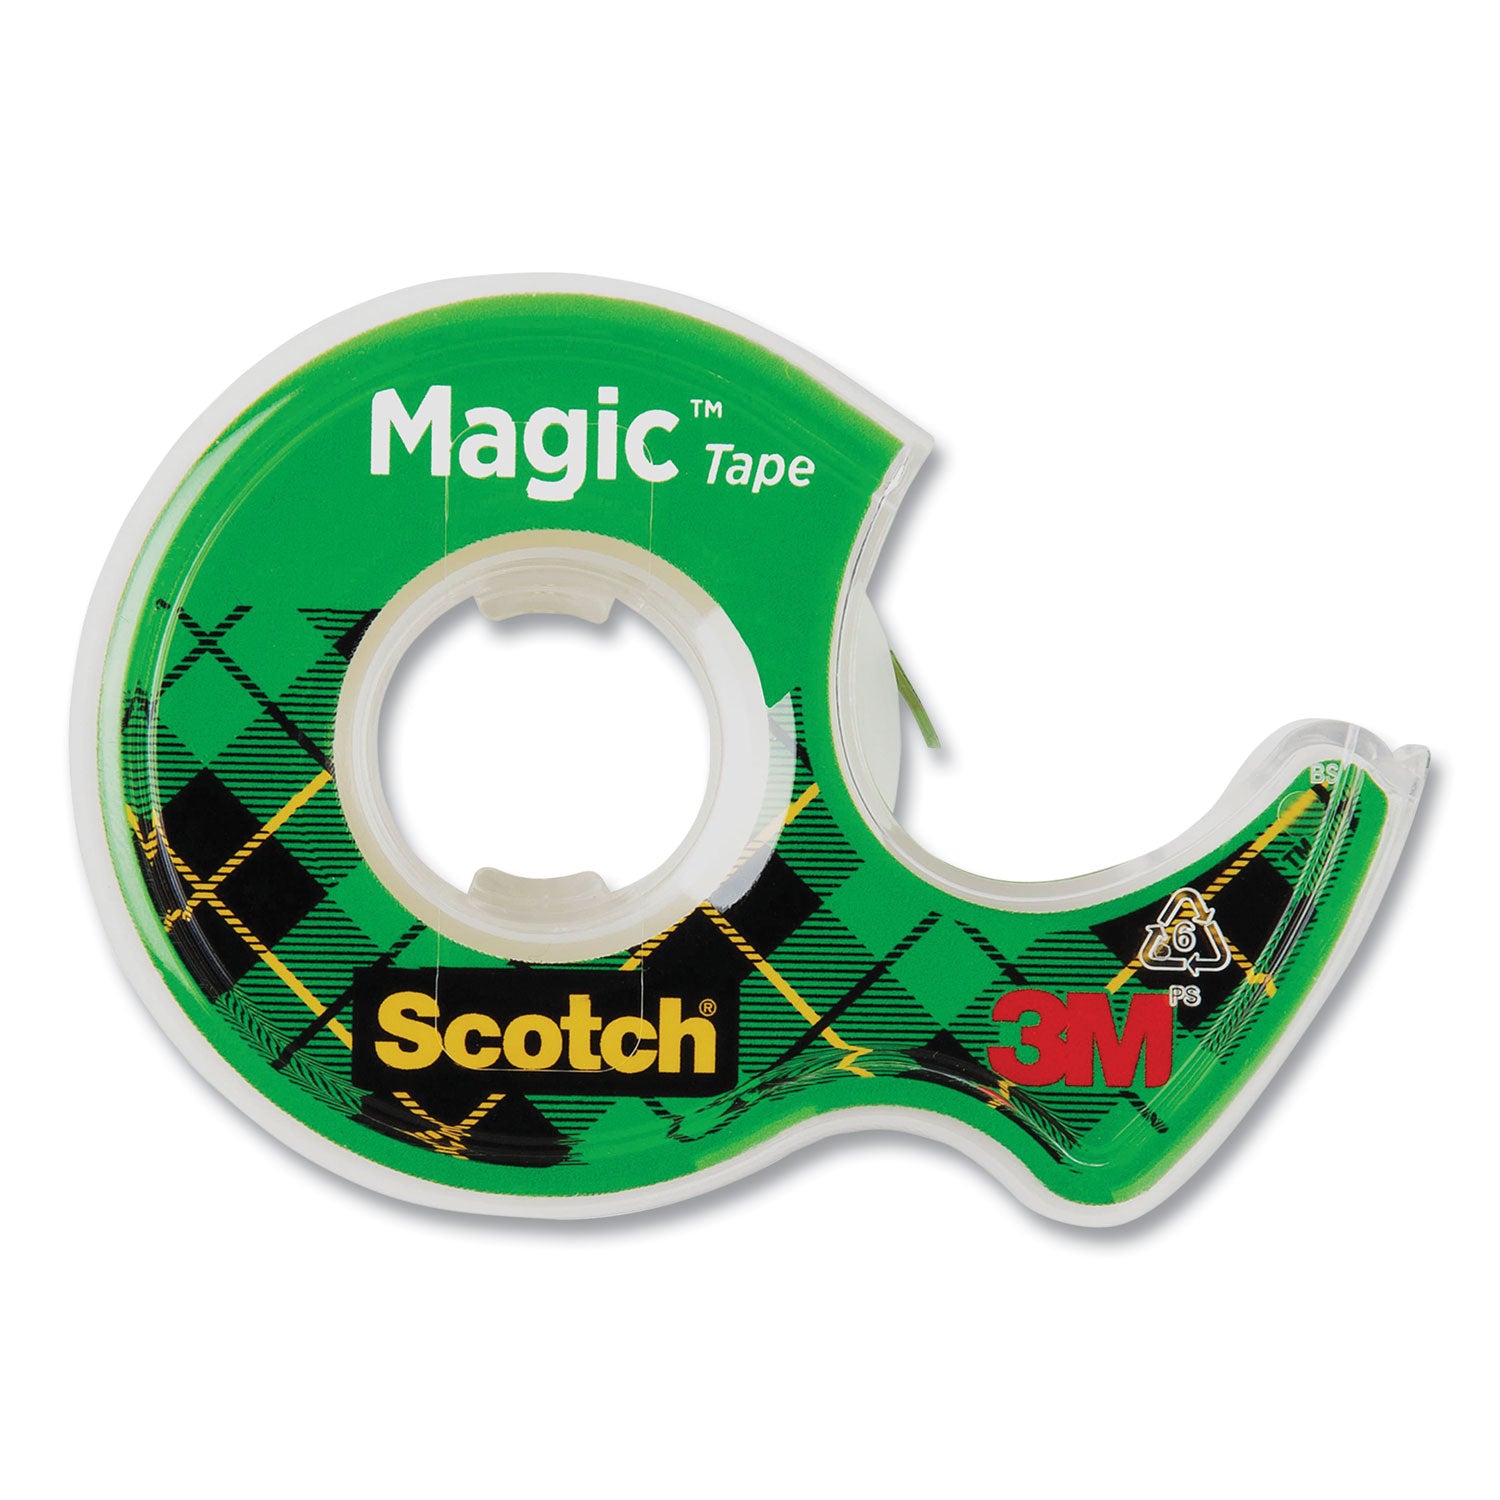 back-to-school-pack-assorted-tapes-plus-scissors-kit_mmmpkscotch21 - 8